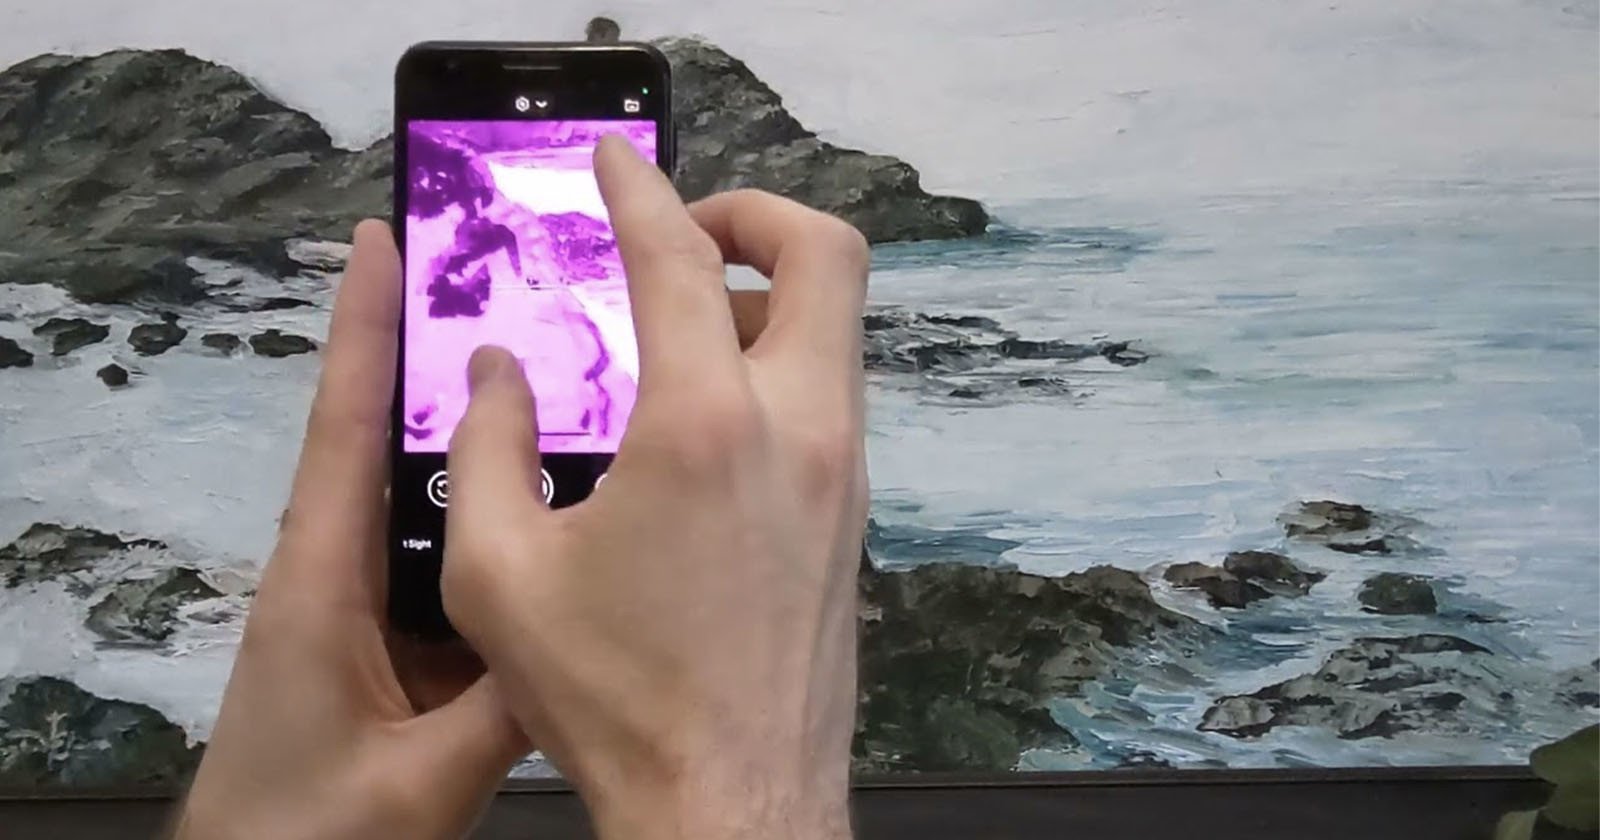 DIY-er Turns a Smartphone into a Multispectral Camera for Art Analysis